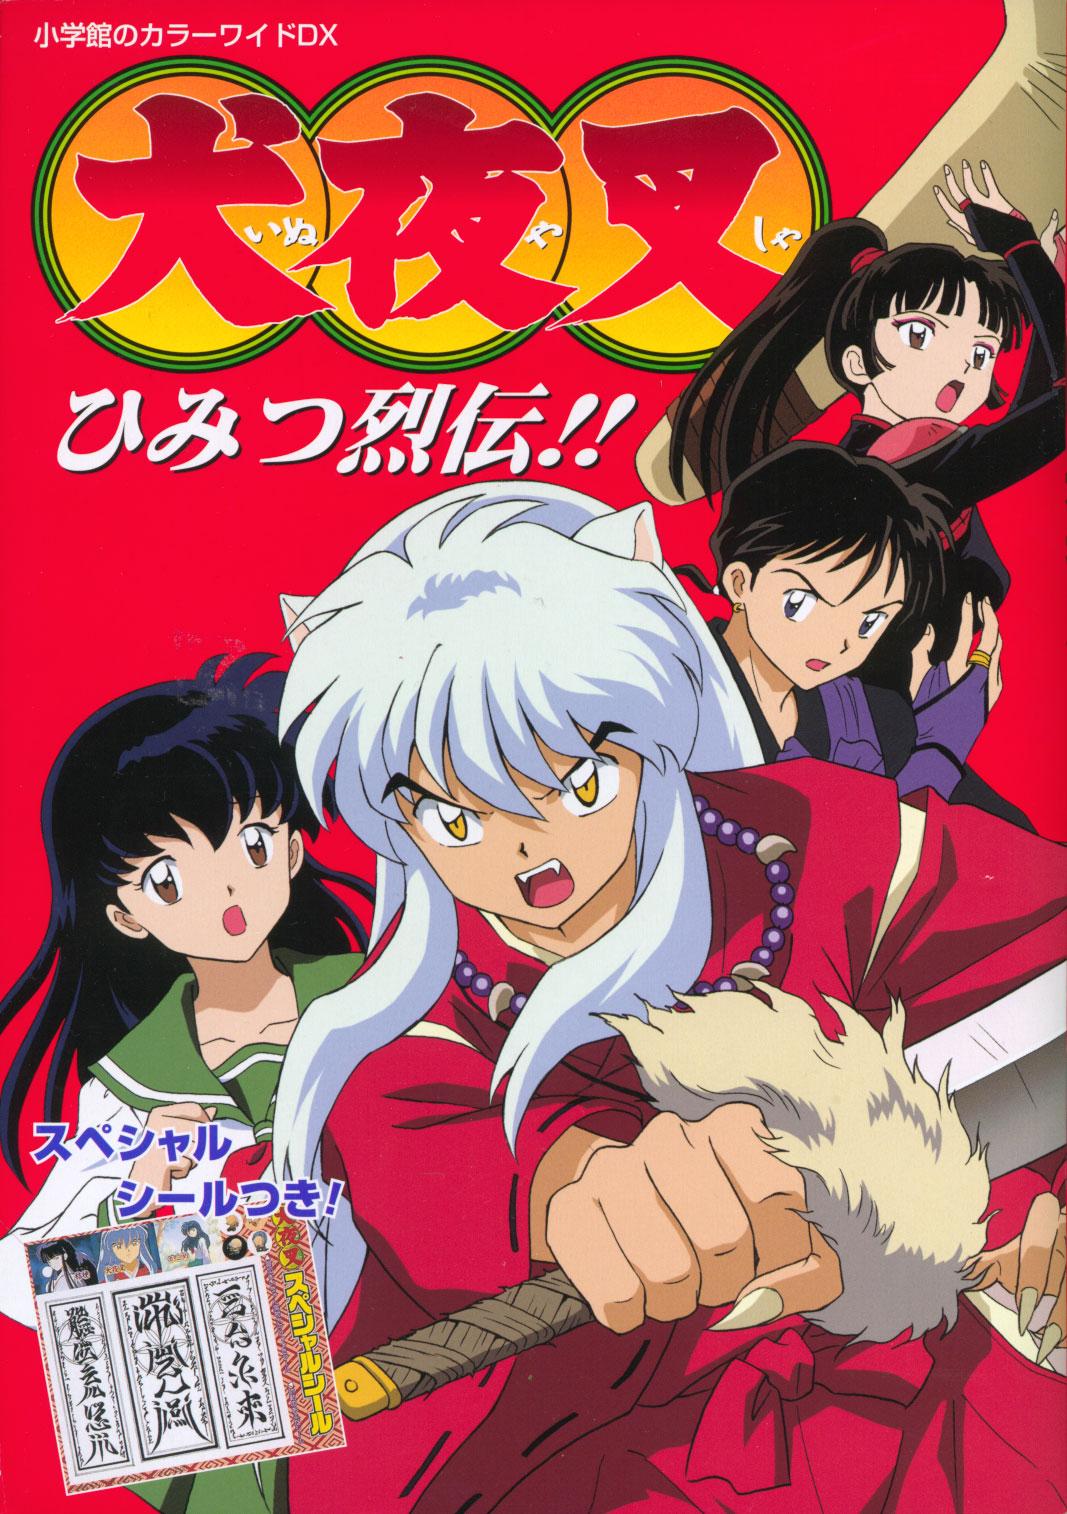 InuYasha Pictures, Pics, and Images #28 @ Anime Cubed